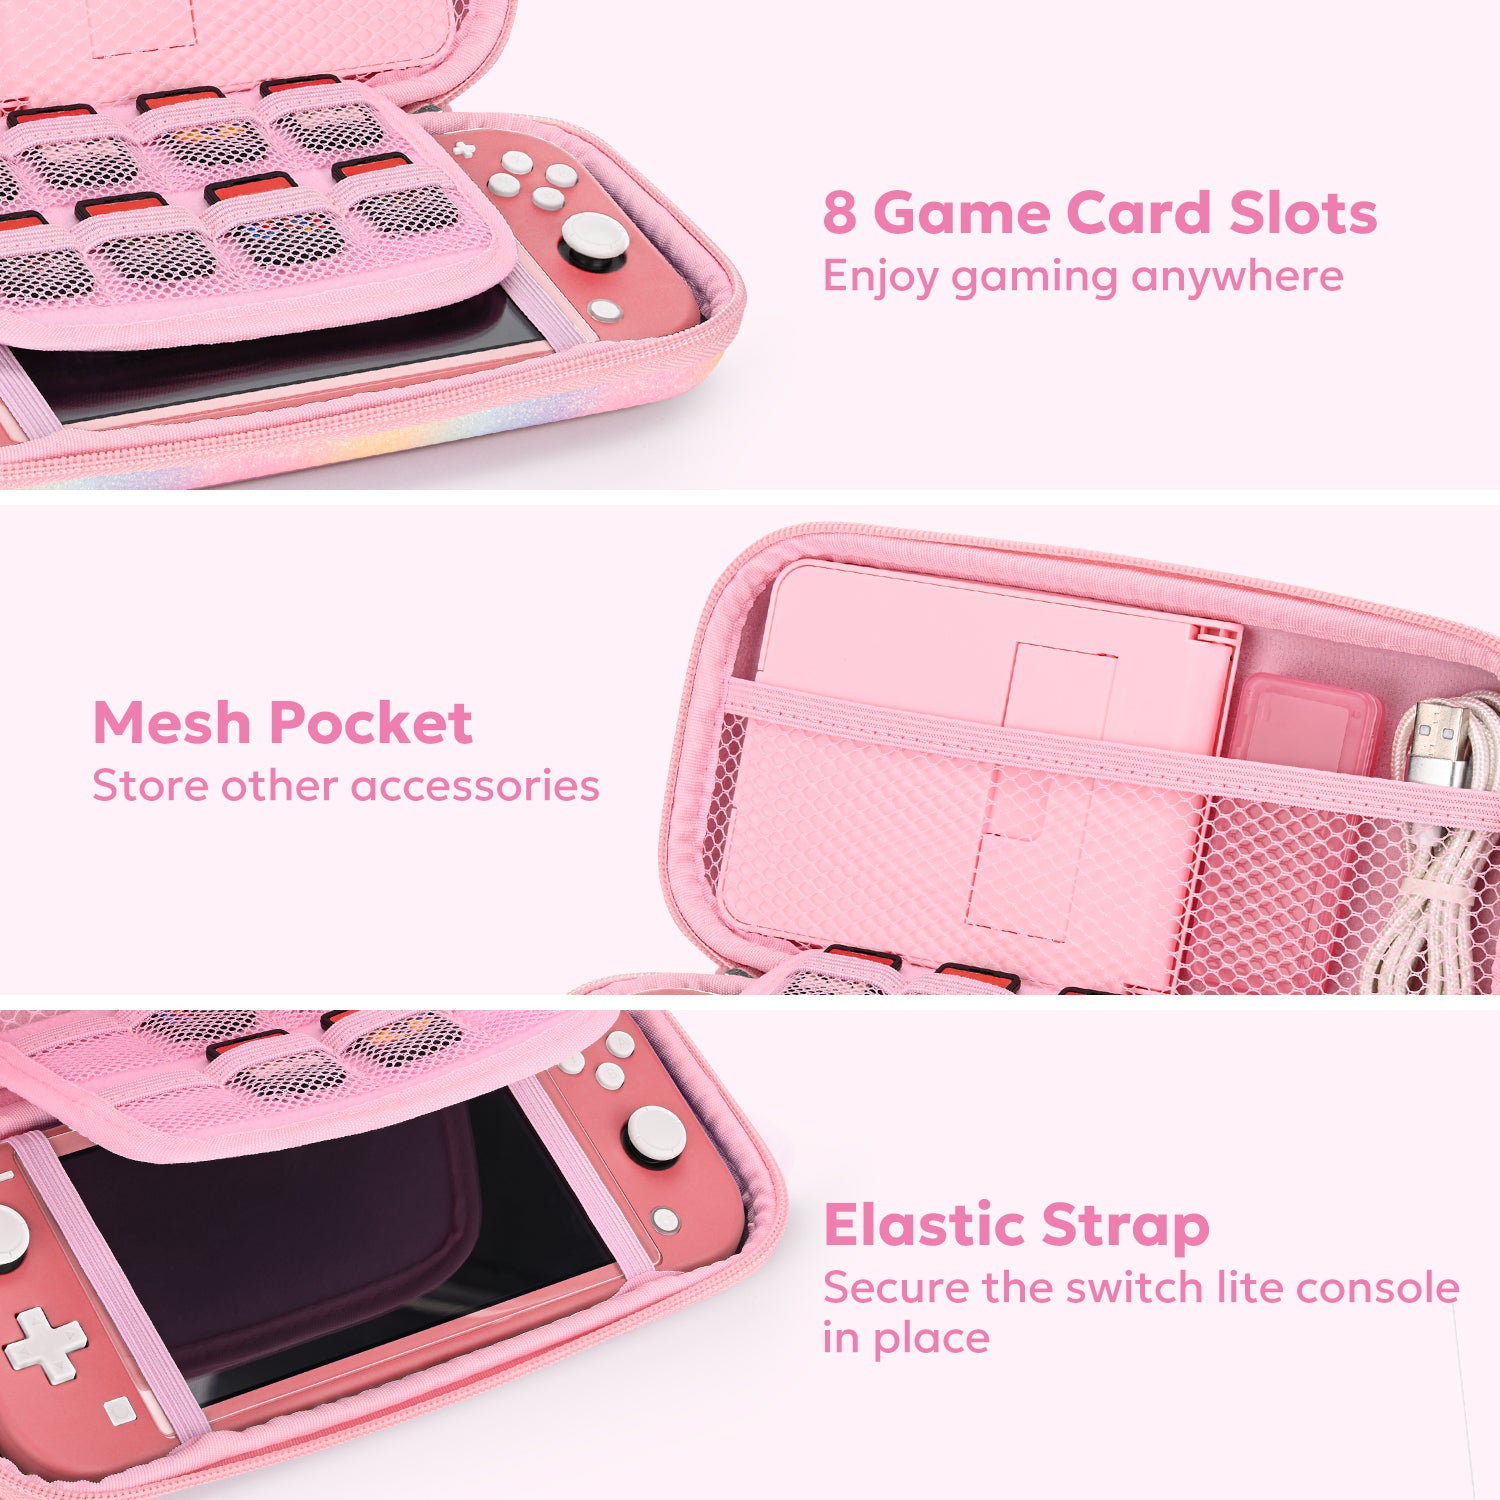 innoAura Switch Lite Travel Case, Cute Carrying Case for Nintendo Switchlite